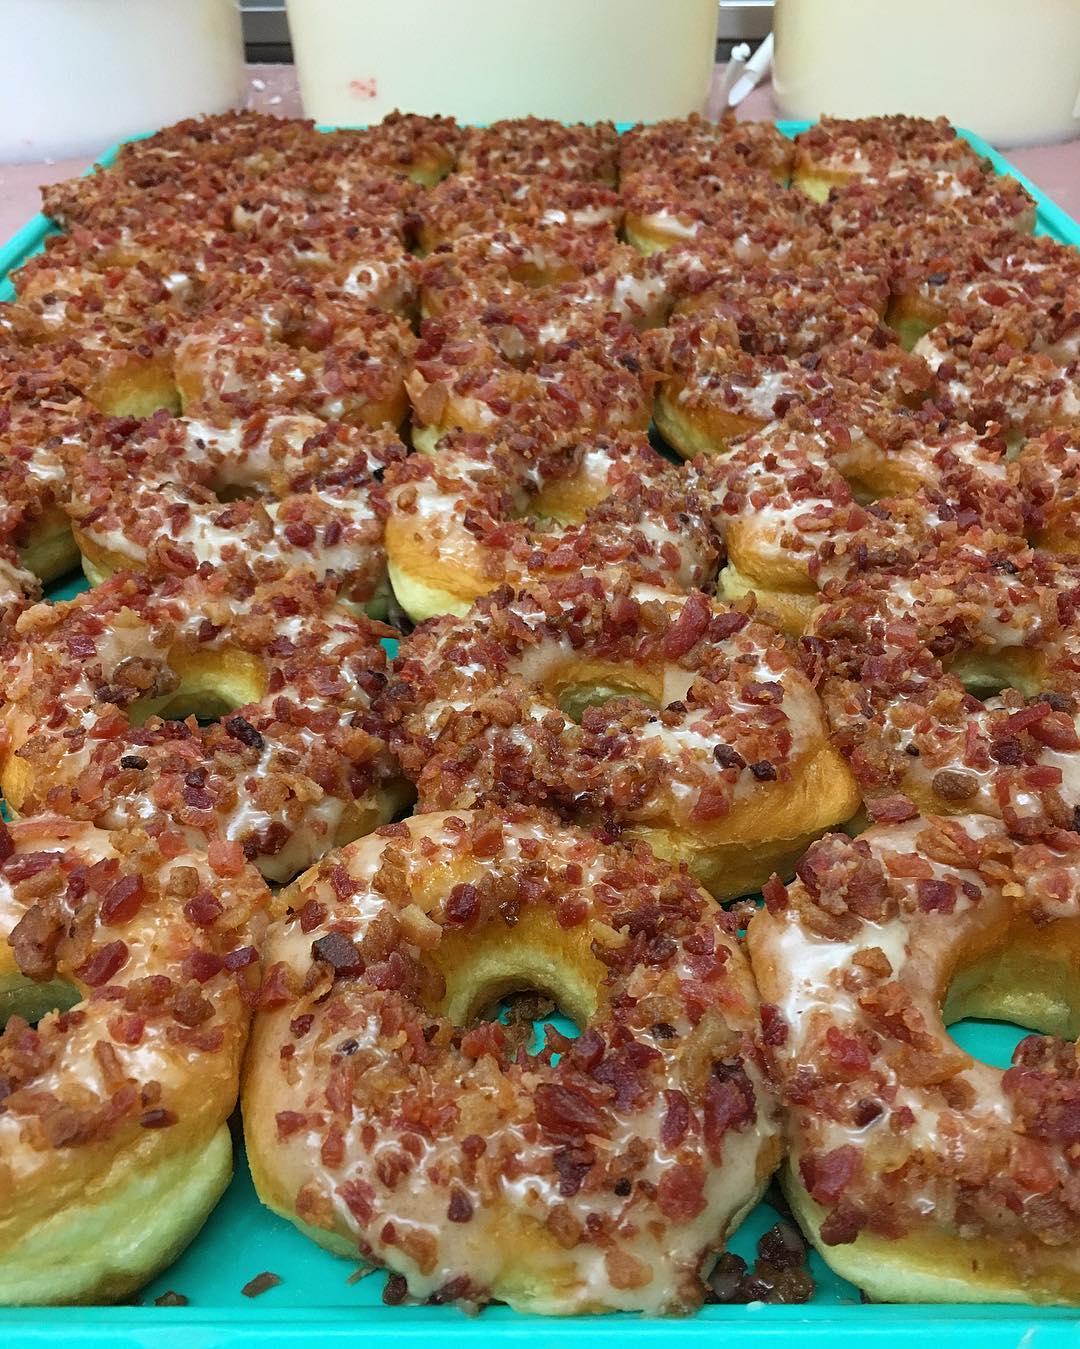 Late night bites: A tray full of donuts covered in bacon.